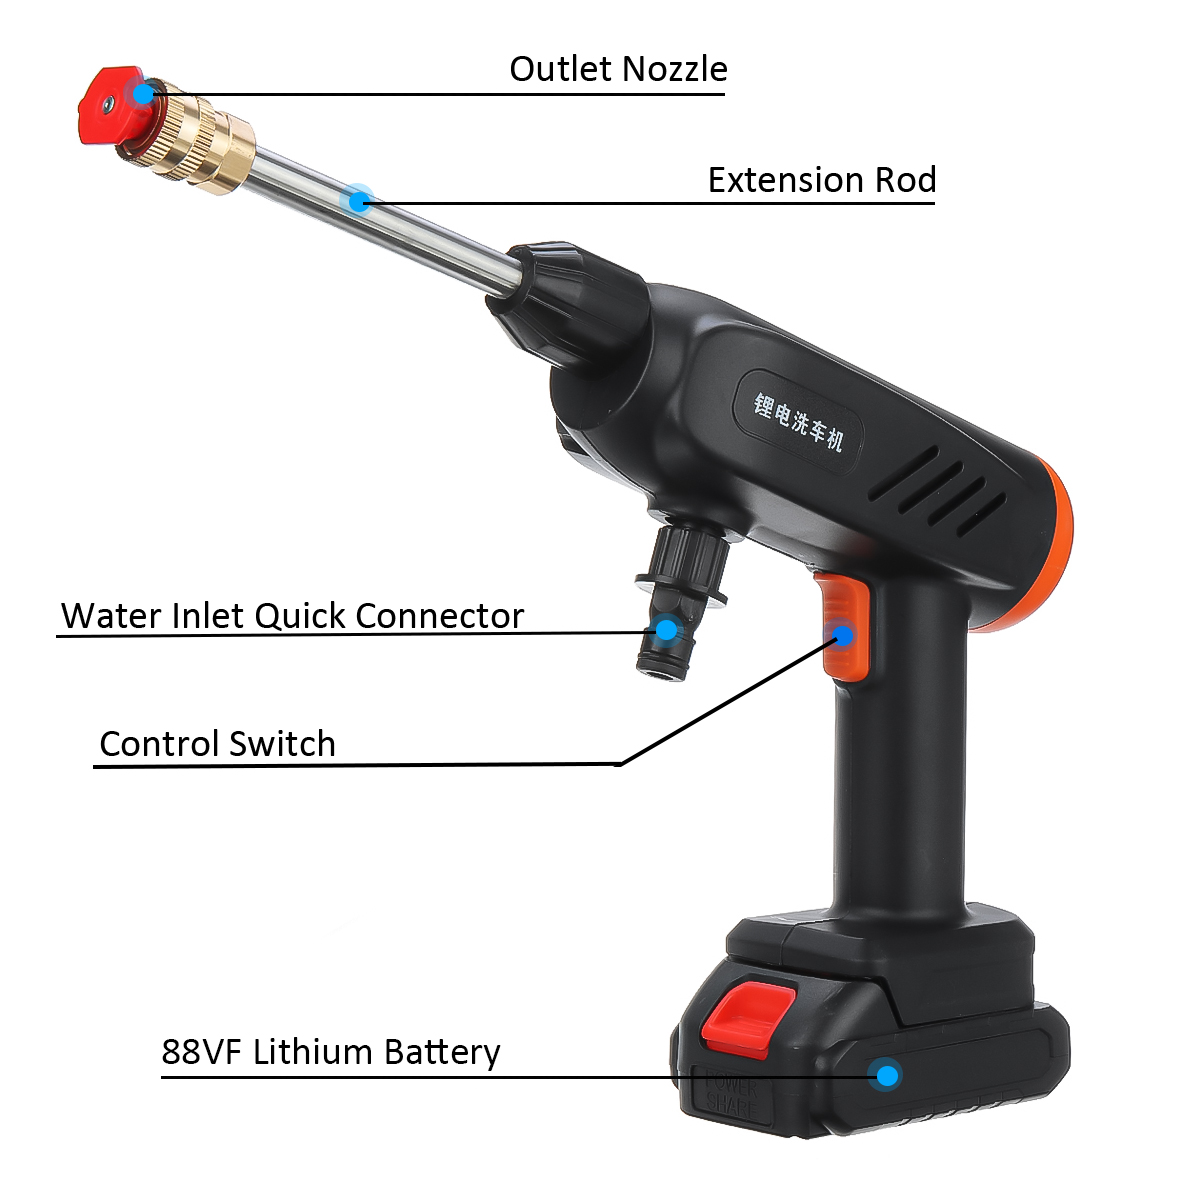 88VF-1500W-Electric-Spray-Guns-Cordless-Rechargeable-Water-Clener-Applicator-Home-Improvement-Craft--1919202-4